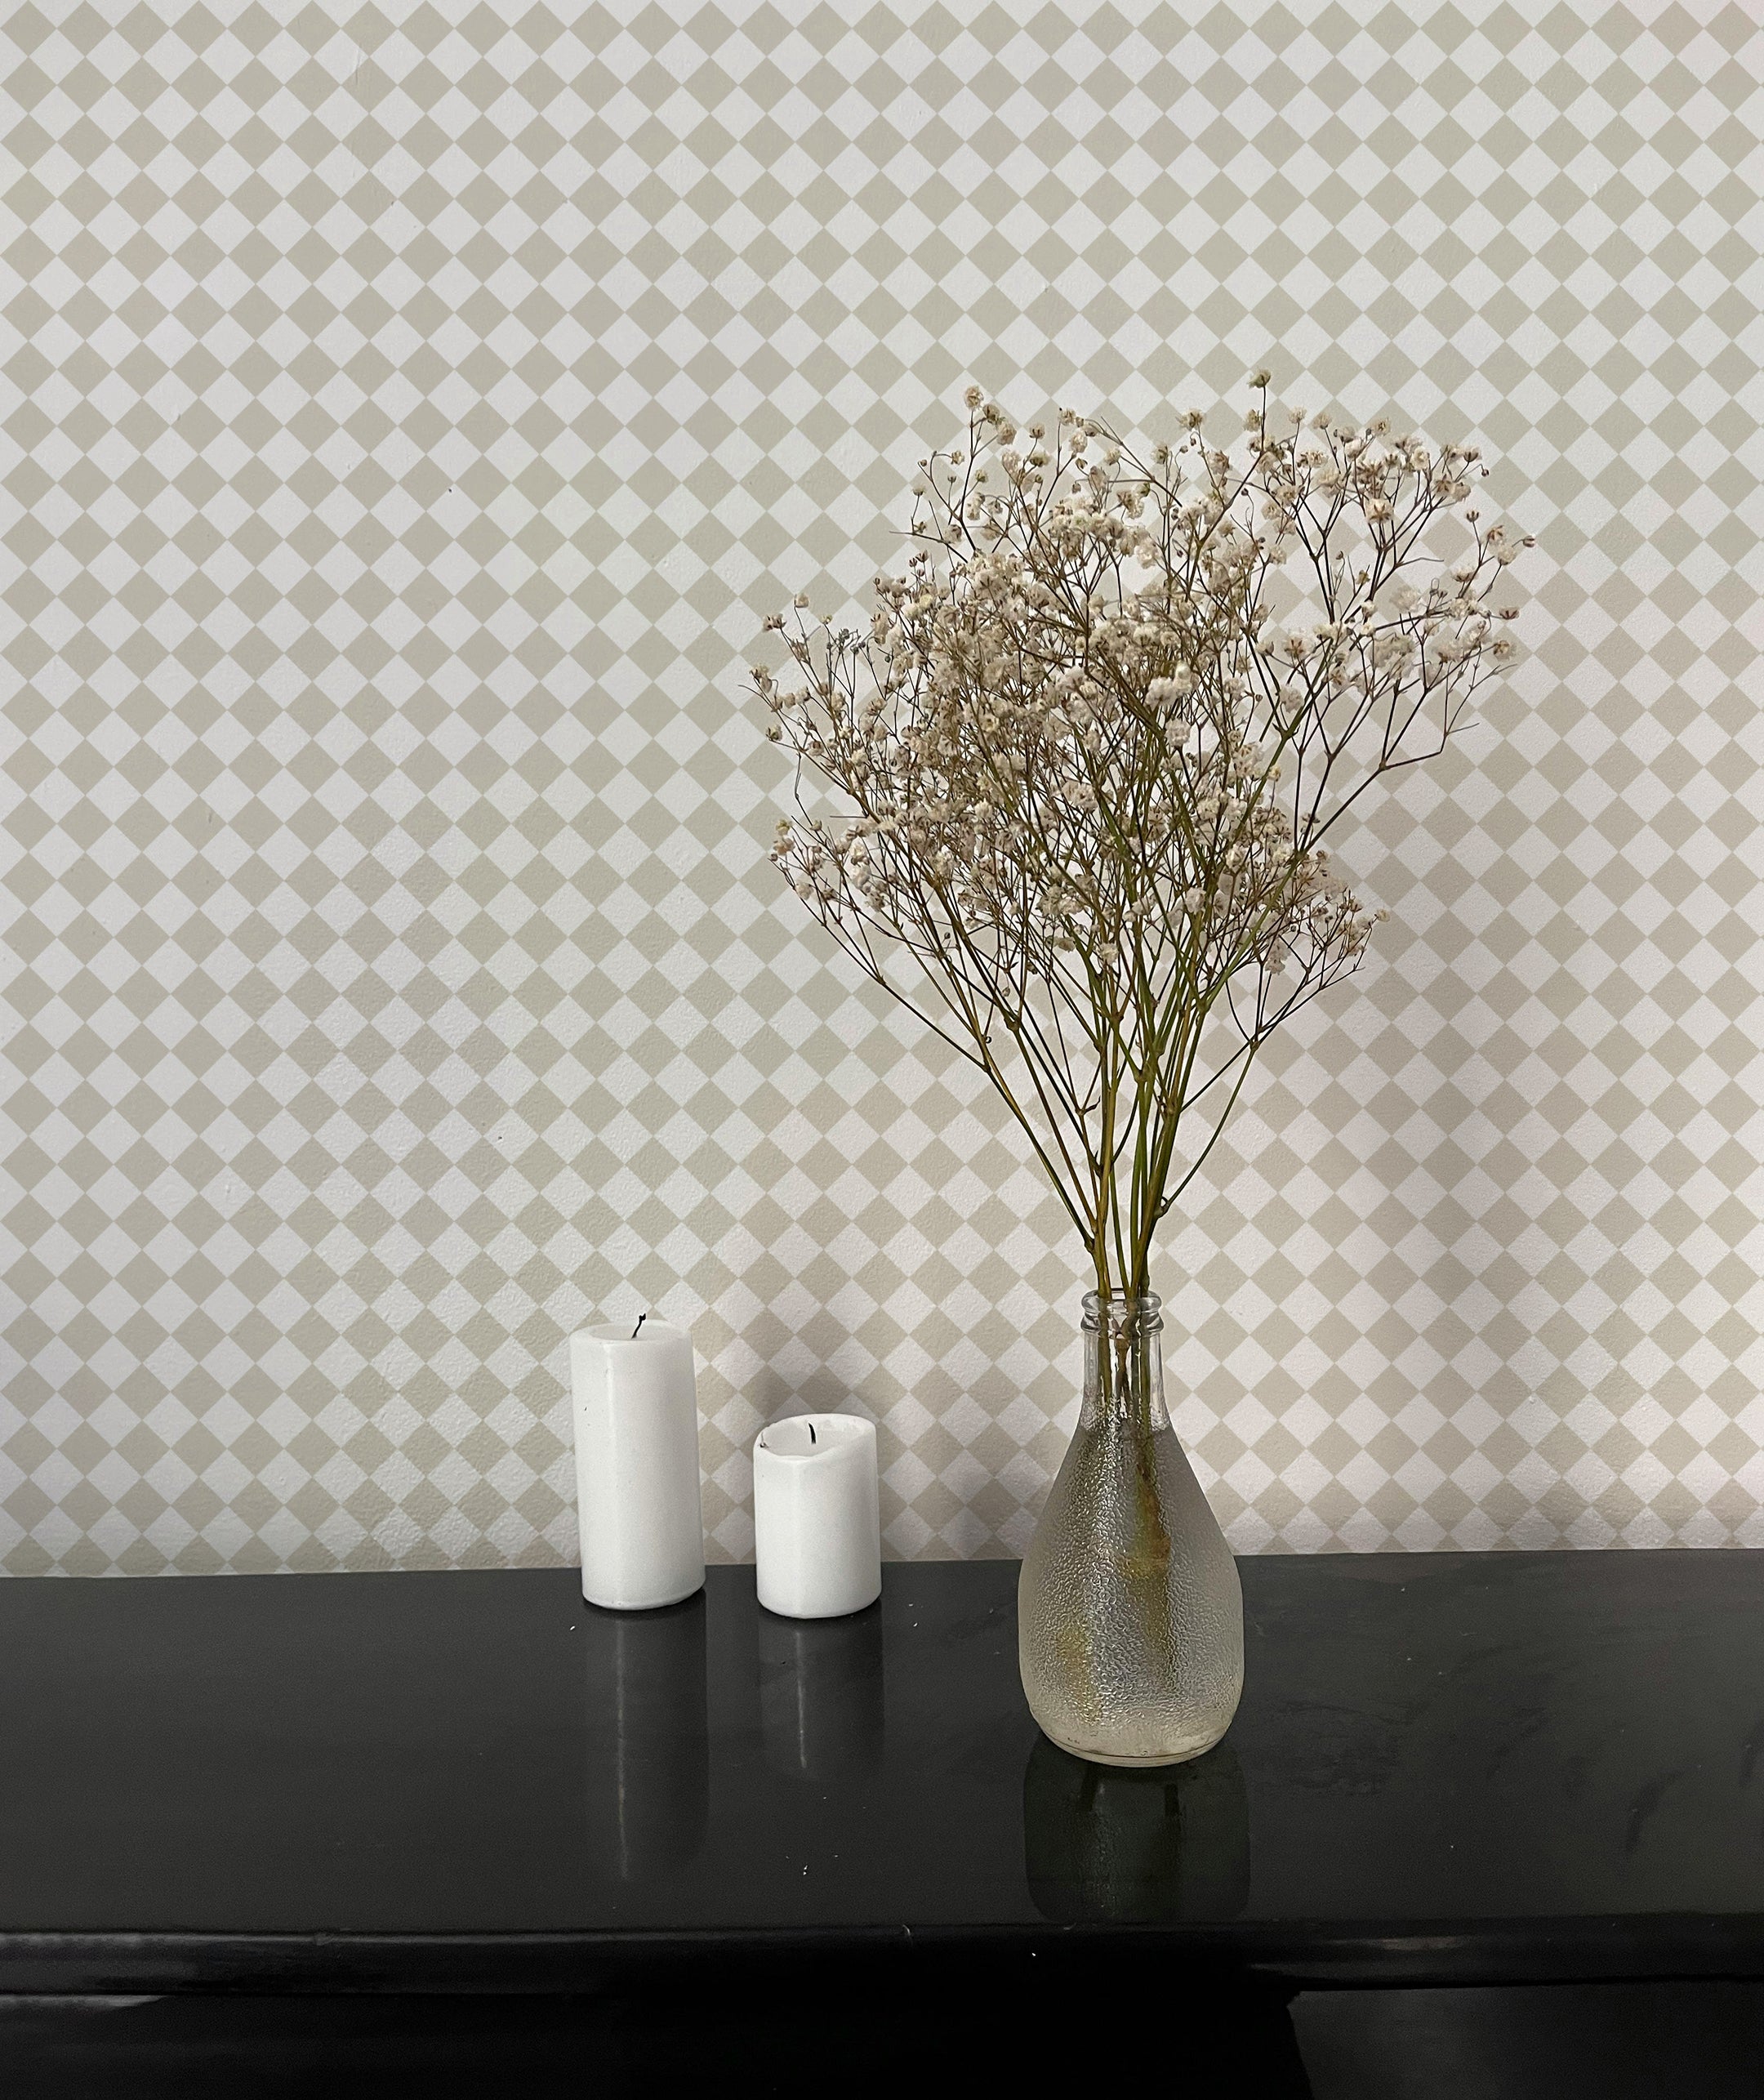 A minimalist setting featuring a black surface with two white candles and a clear vase holding delicate dried flowers. The background showcases beige and white checkered wallpaper, adding a subtle and elegant pattern to the scene.